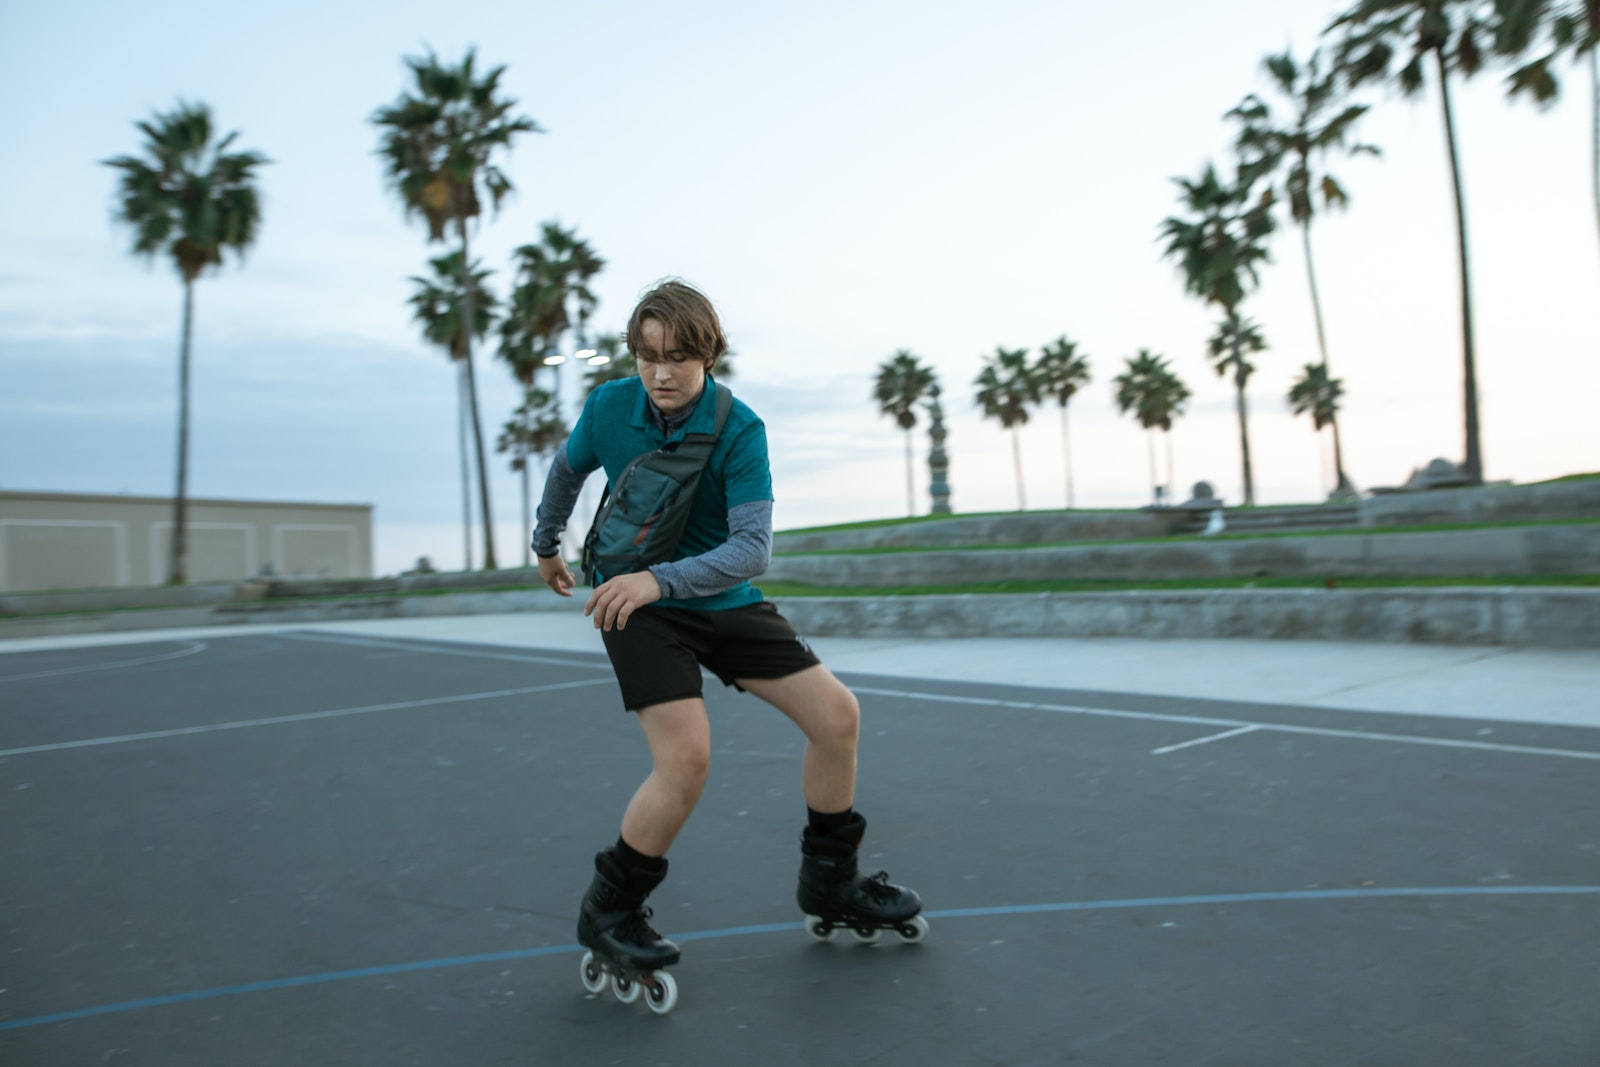 A Young Man Rollerblading for Recreation